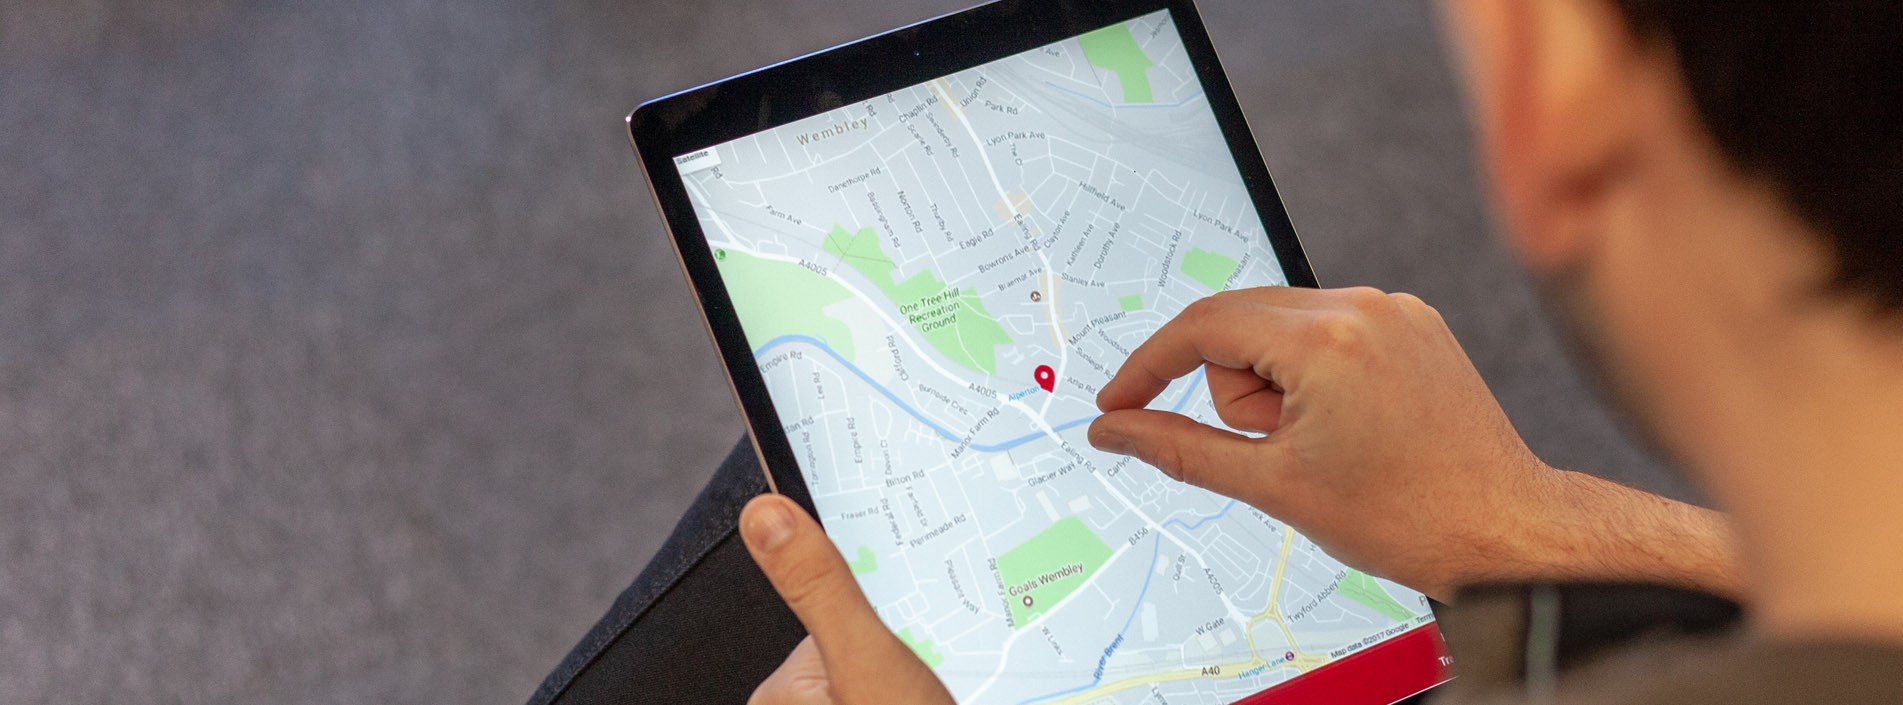 man zooming in on ipad, showing google maps location for custom development manchester